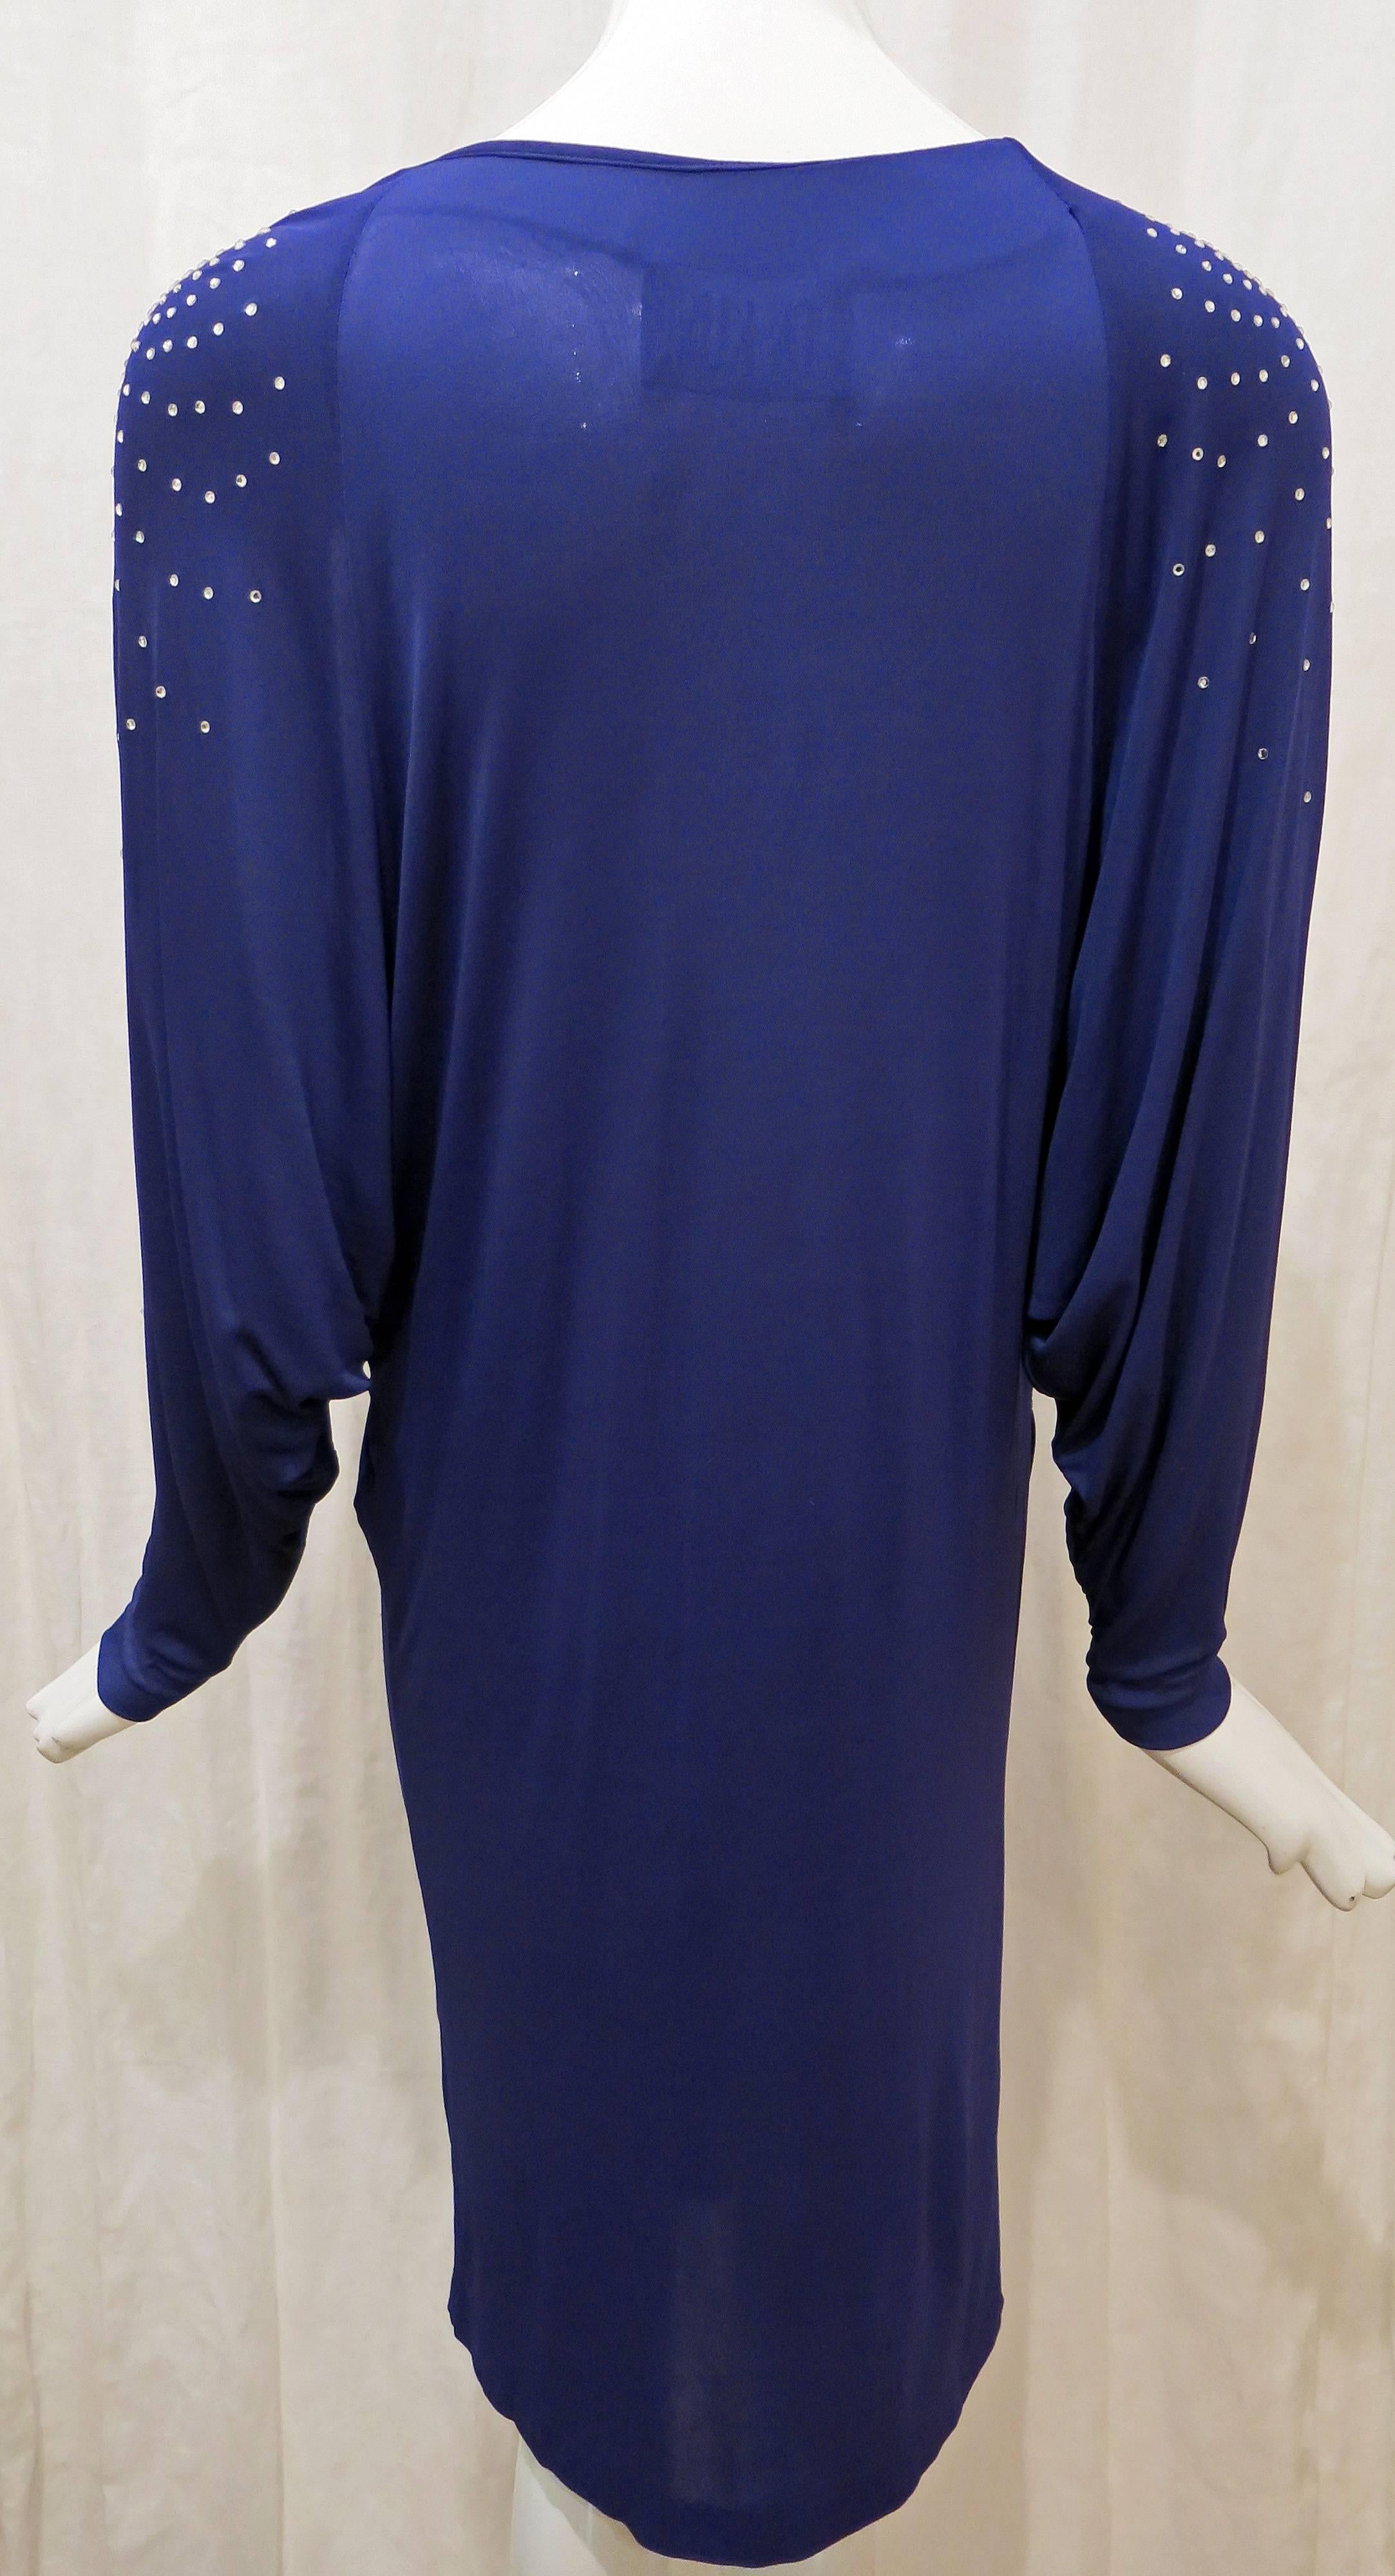 Women's or Men's 1980s Draped Rayon Jersey Don Kline Dress with Rhinestones For Sale